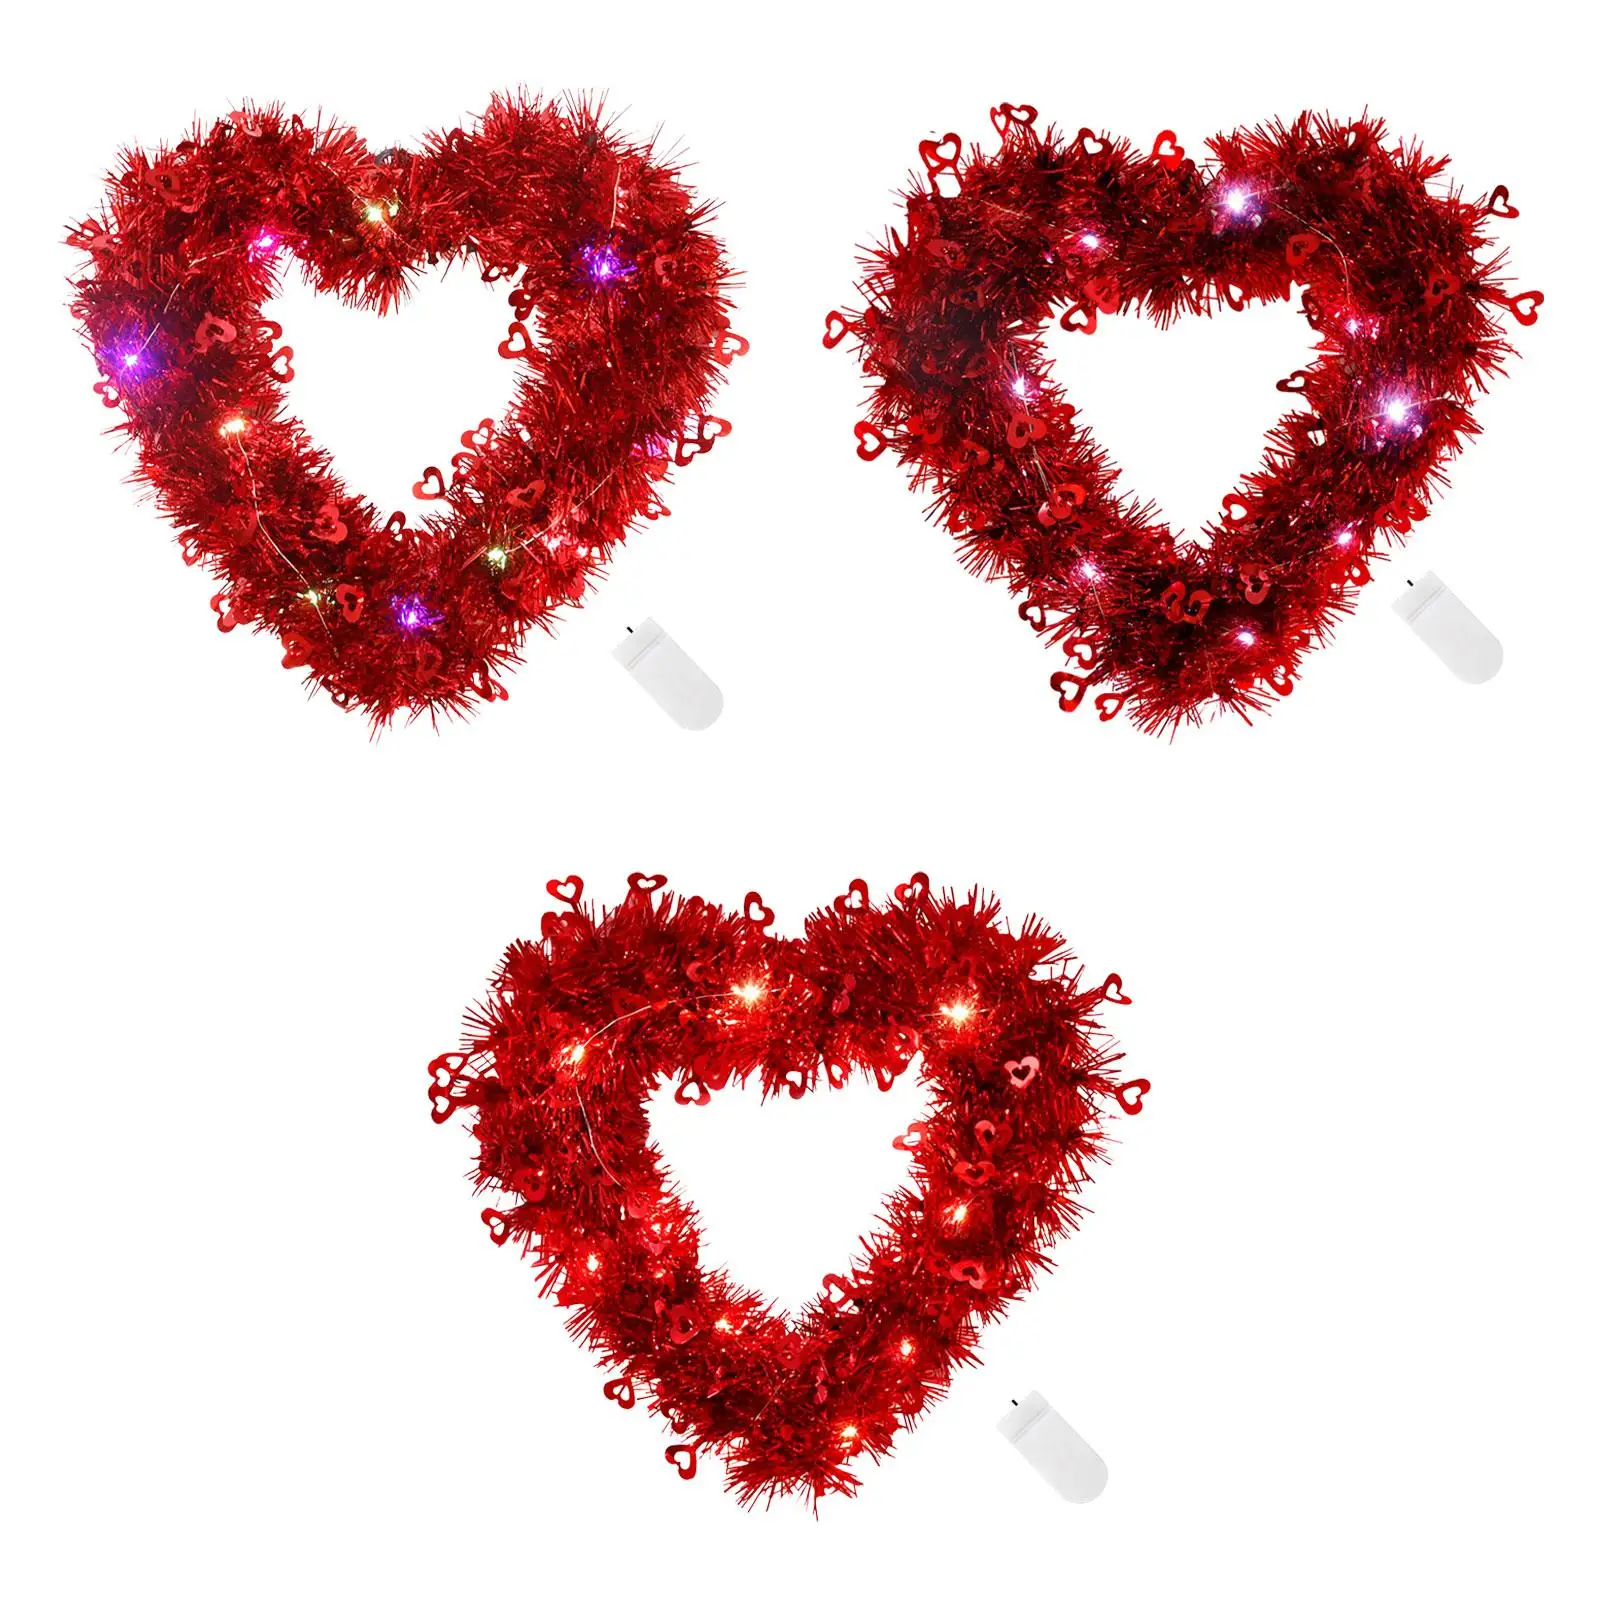 Heart Shaped Valentine Wreath with Light Front Door Decoration for Wedding Anniversary Decor Lightweight Sturdy Stylish Reusable